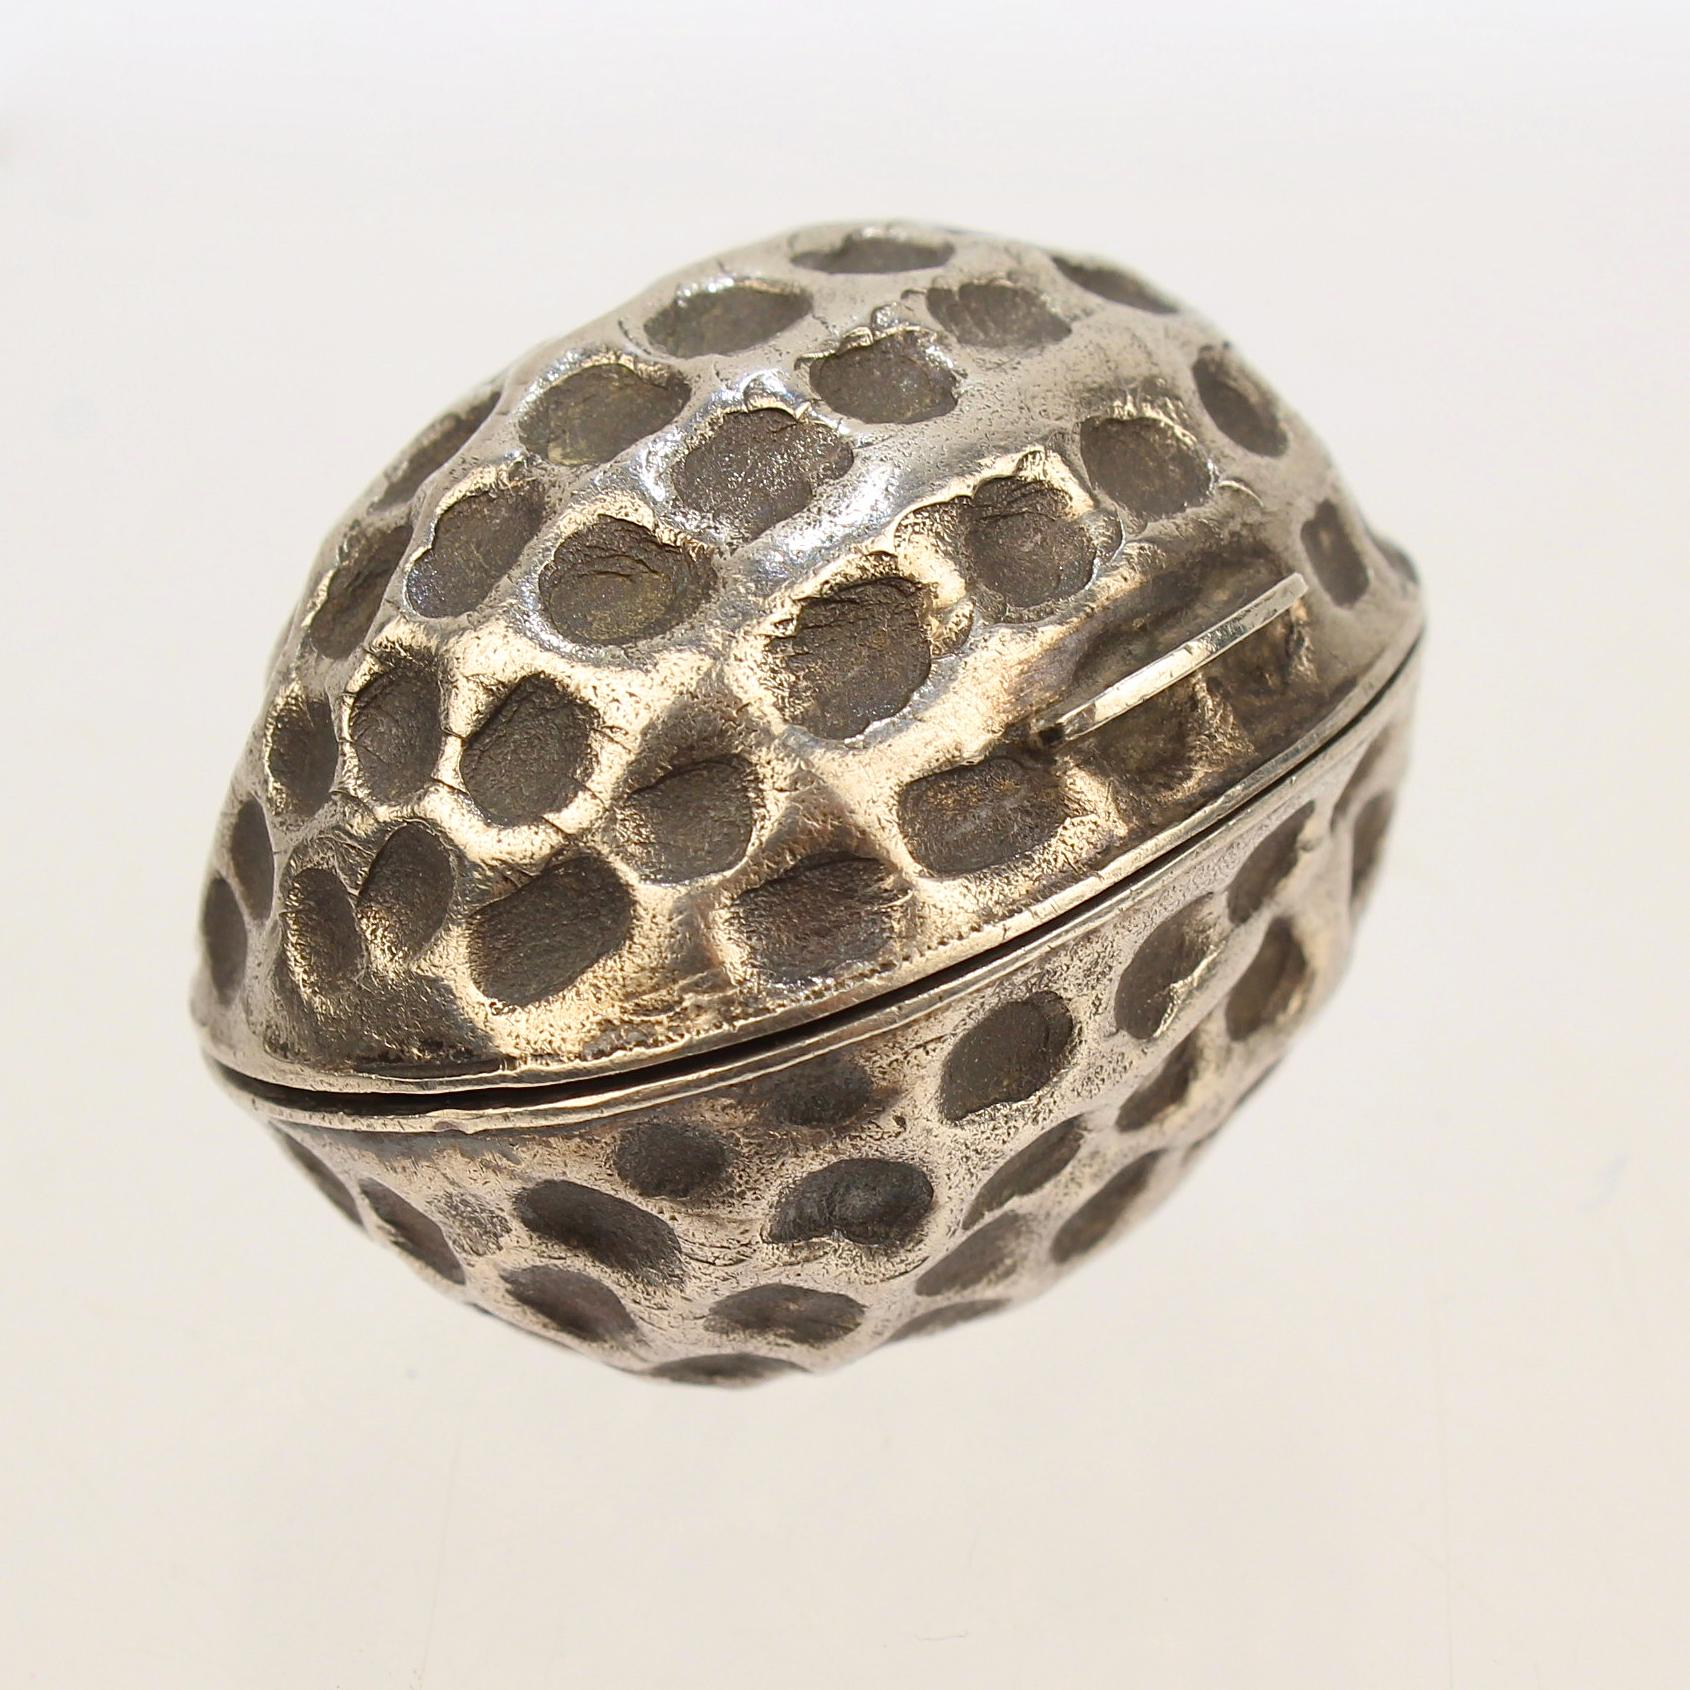 A very rare English sterling silver nutmeg grater.

Modeled as a walnut formed body and with a cover that reveals a hinged steel grill or grater.

The interior rim bears hallmarks for Hilliard & Thomason.

A fine addition to any nutmeg grater